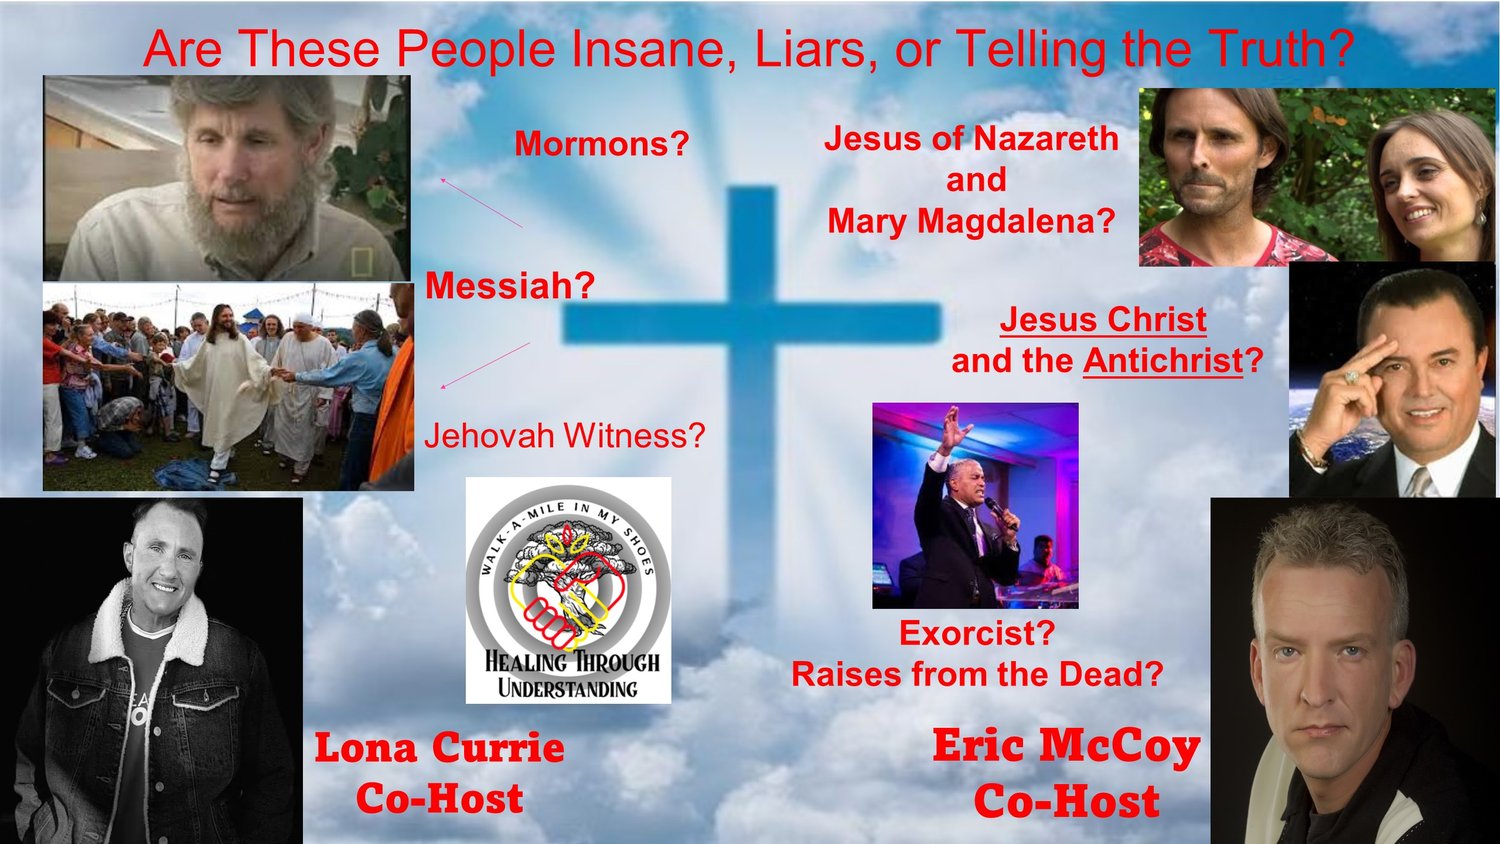 Are They Insane, Liar, or Truthful? Mormons, Witnesses, or Those Who Claim to Be Messiah? Must Watch